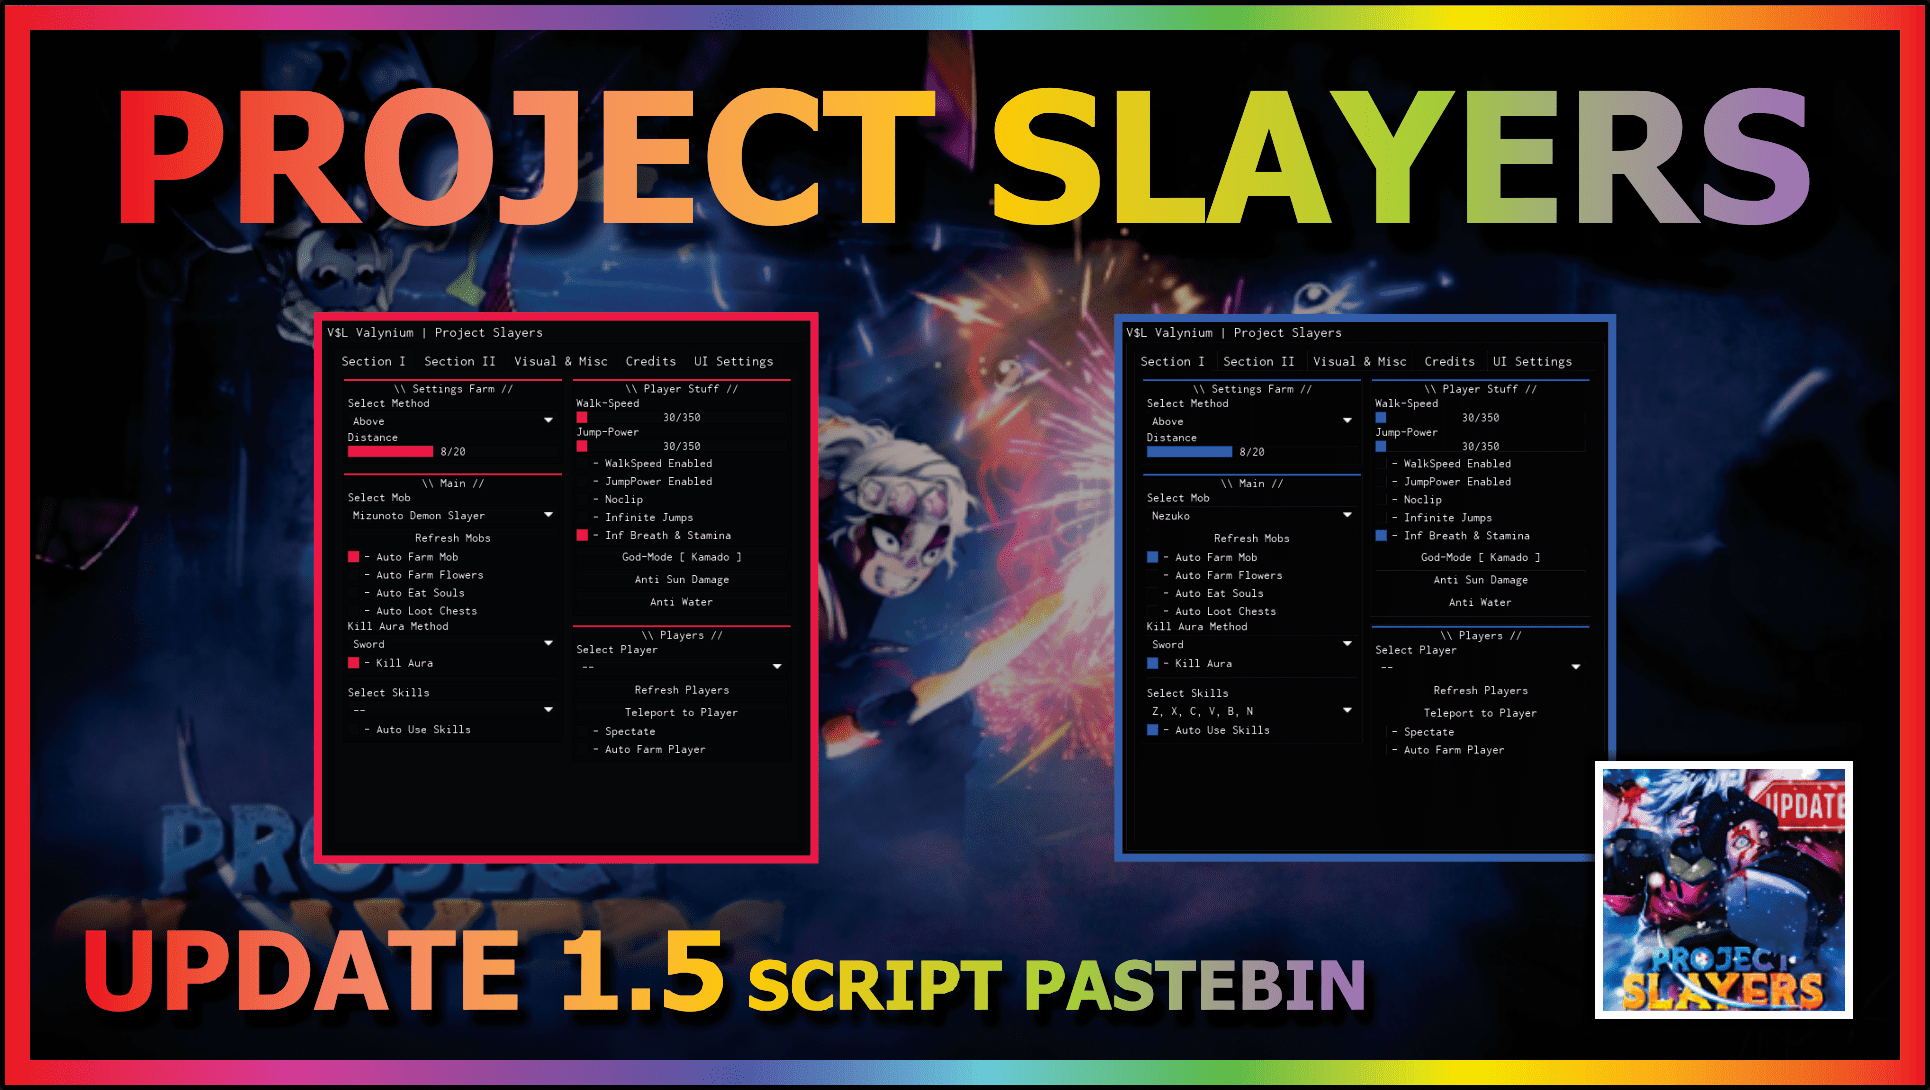 HOW TO PREPARE FOR UPDATE 1.5 OF PROJECT SLAYERS 